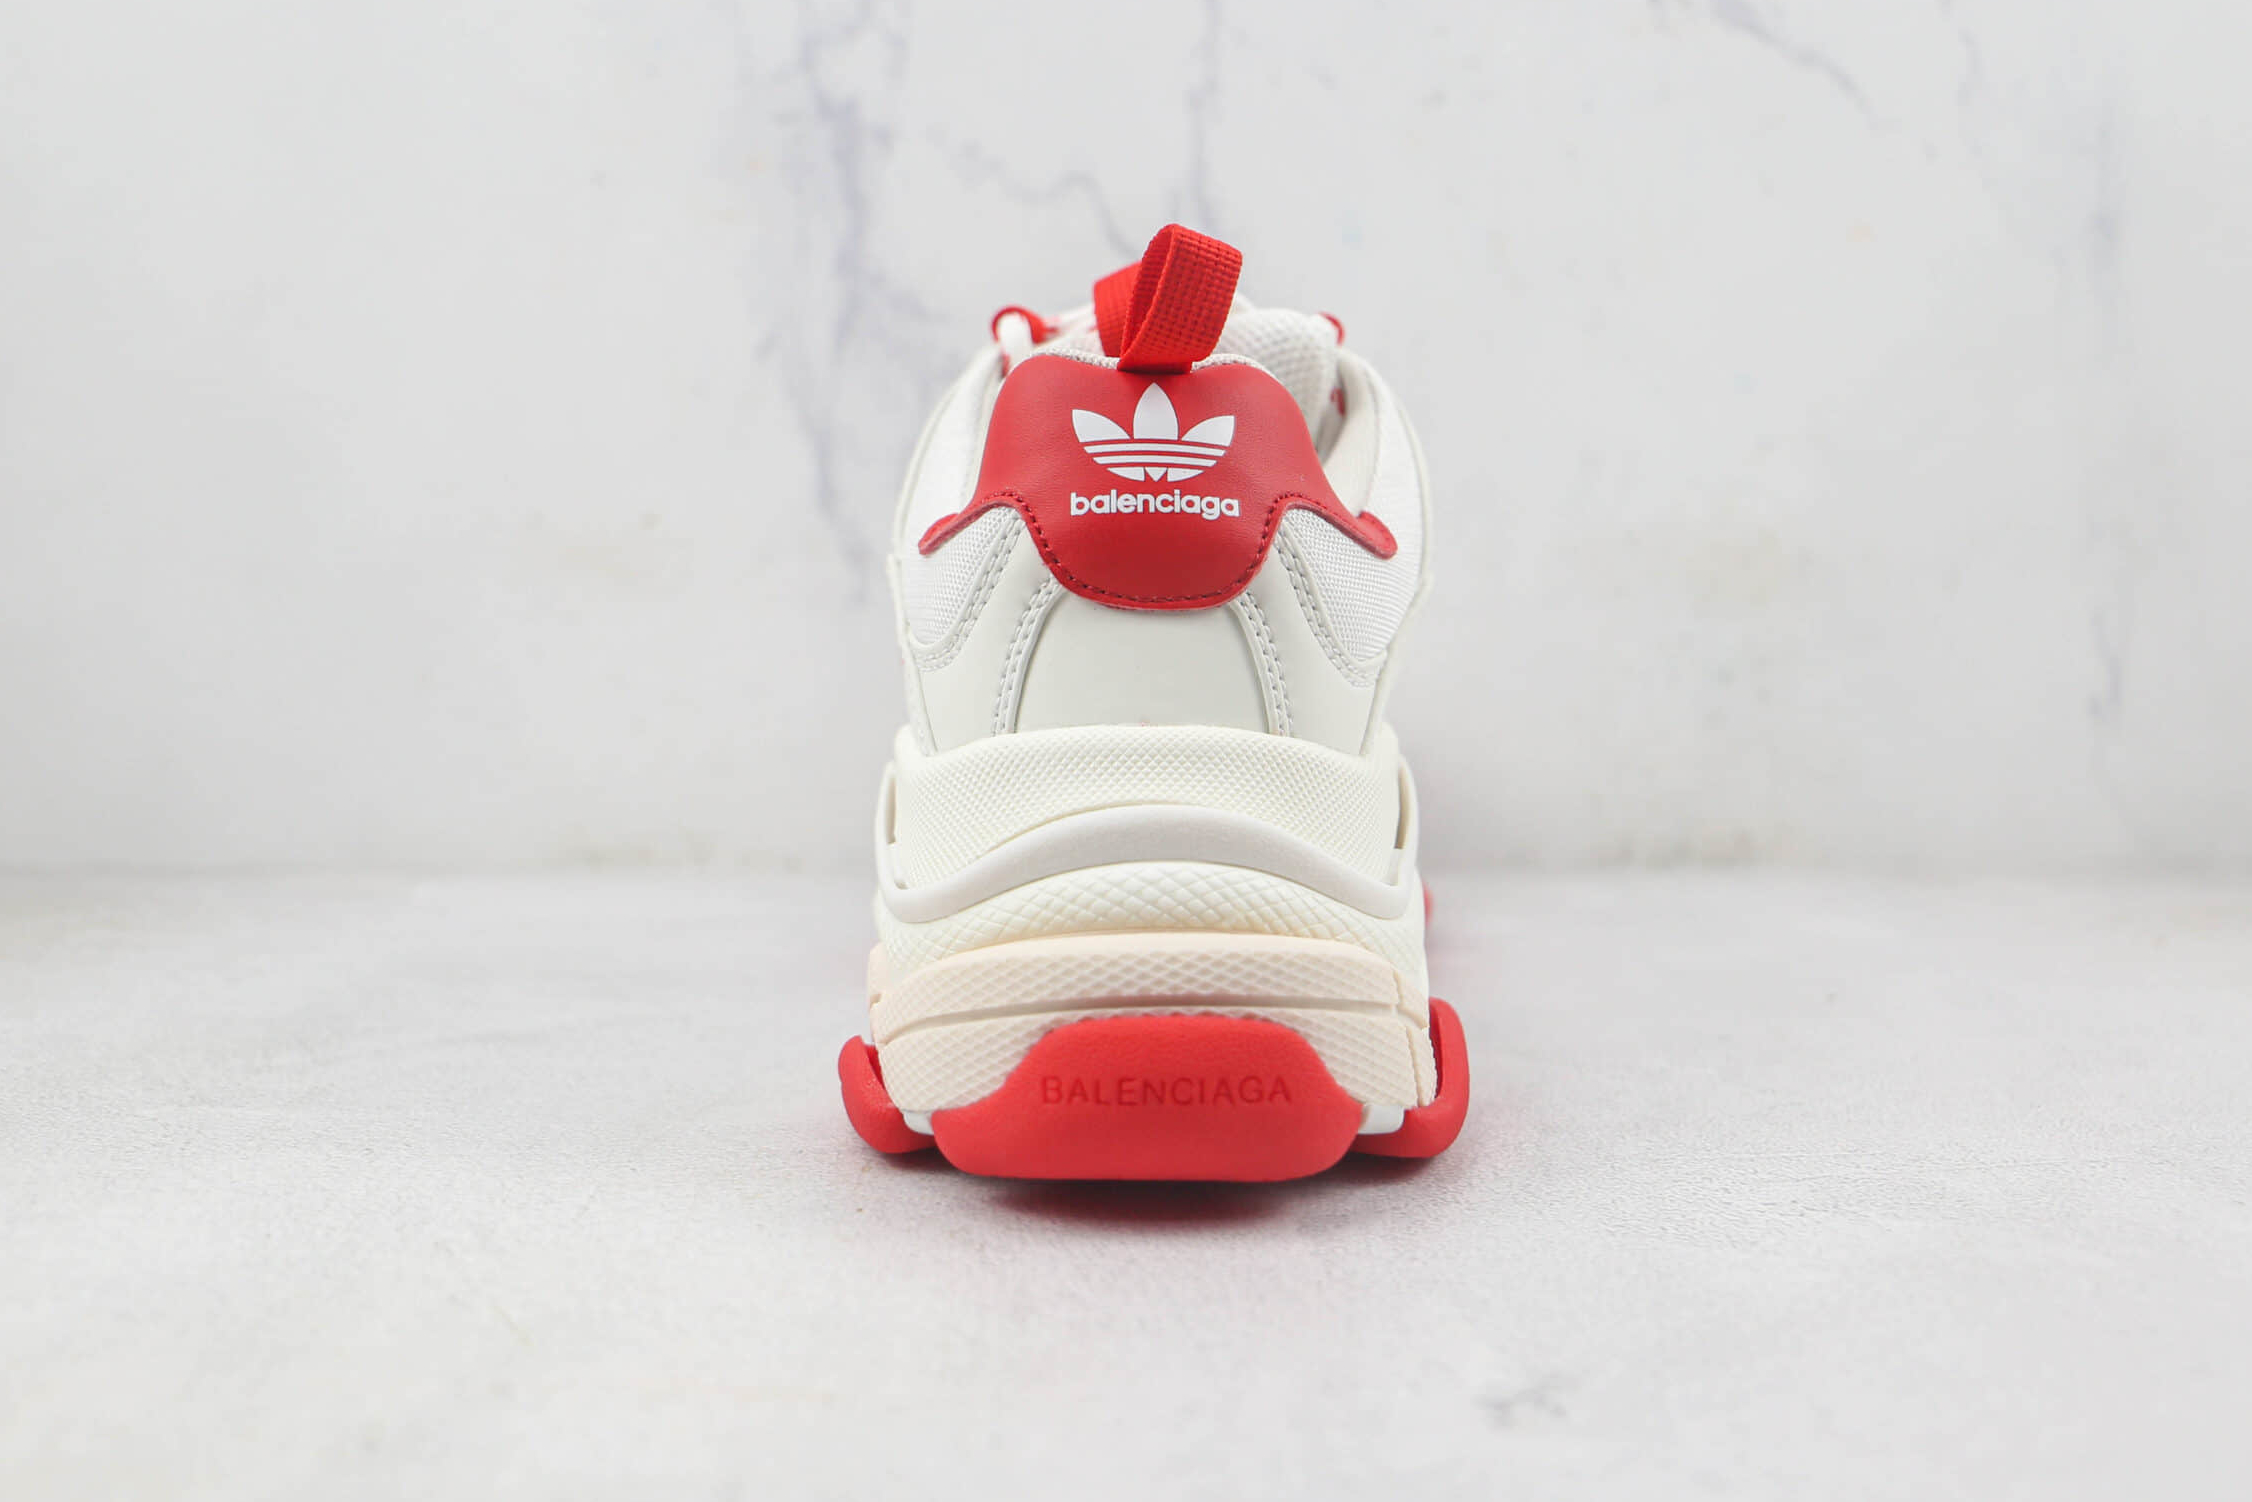 Balenciaga X Adidas Triple S White Red IF0166 - Stylish and Sleek Footwear by Renowned Brands